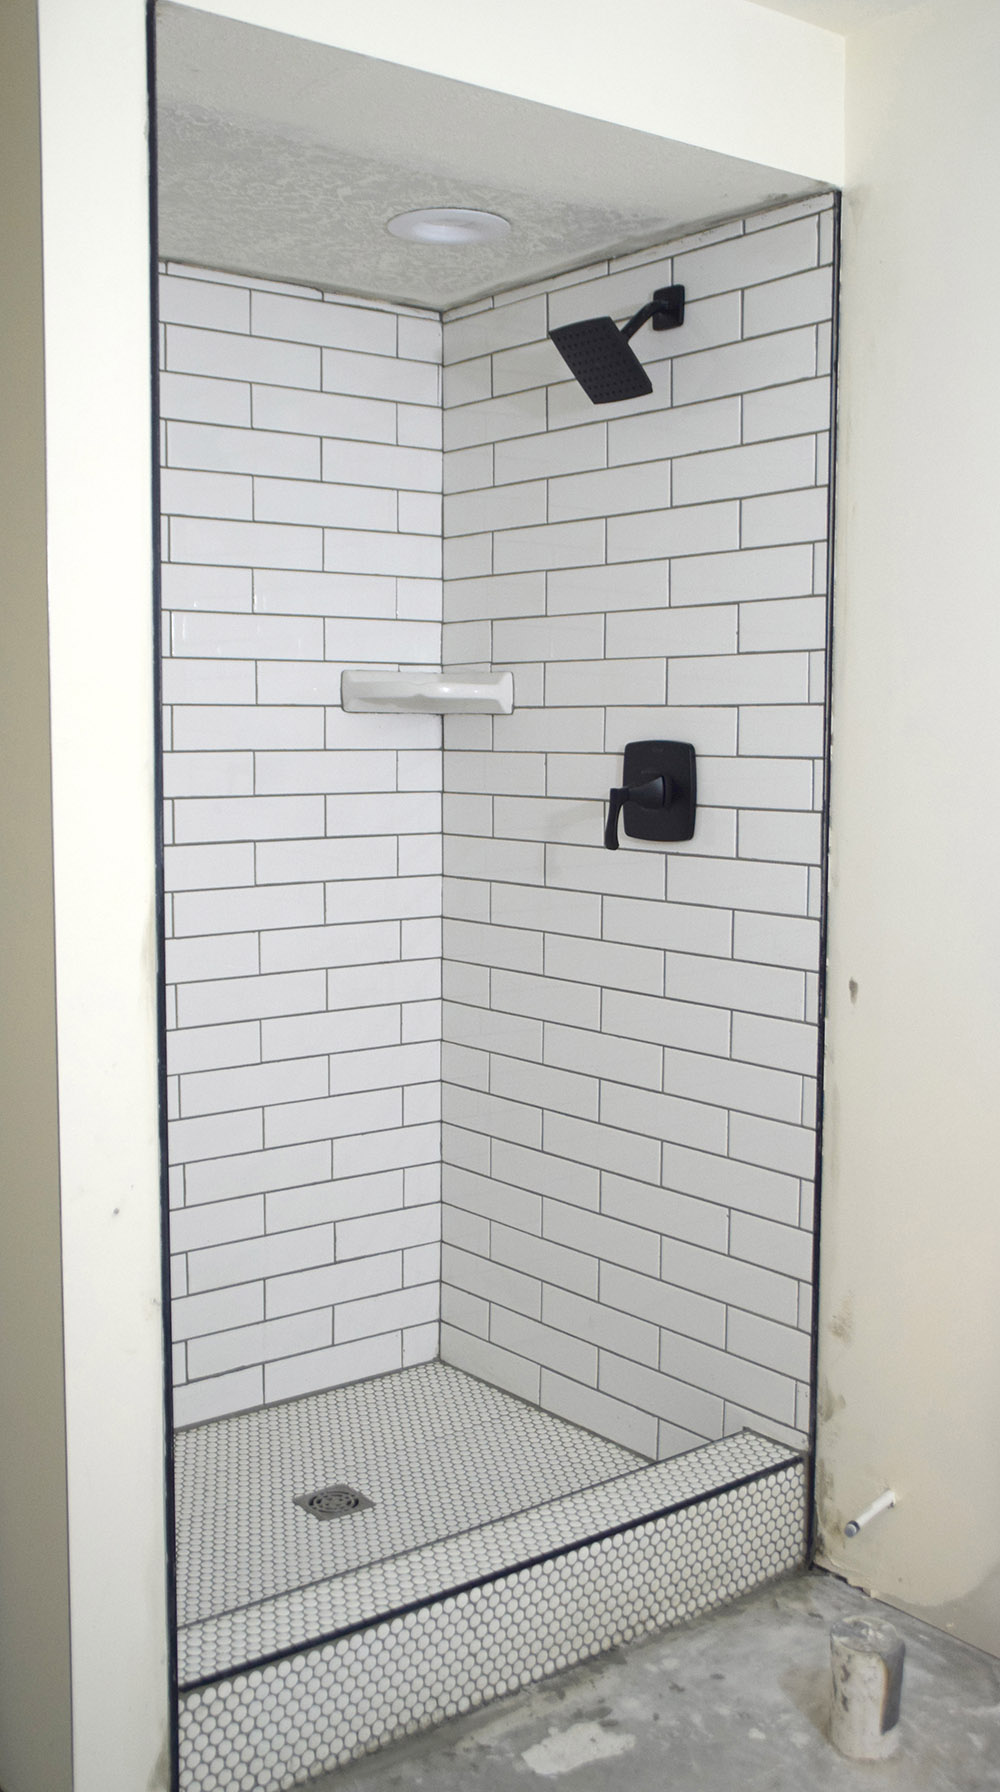 How To Tile A Basement Shower, Re Tiling A Shower Stall Floor